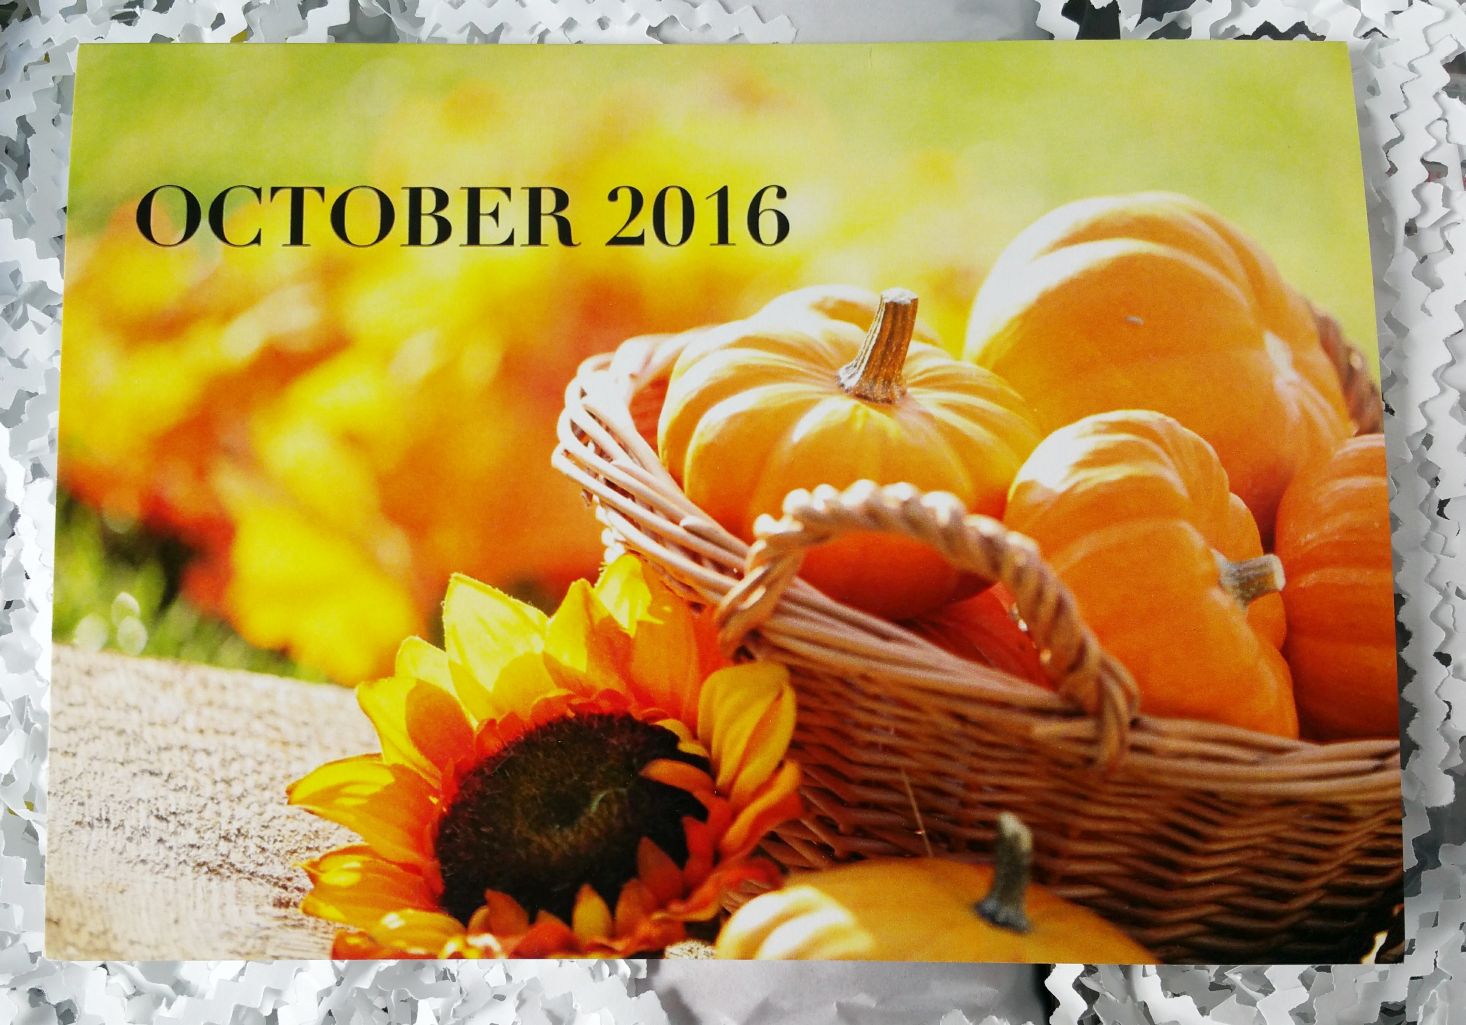 white-willow-october-2016-info-card-1